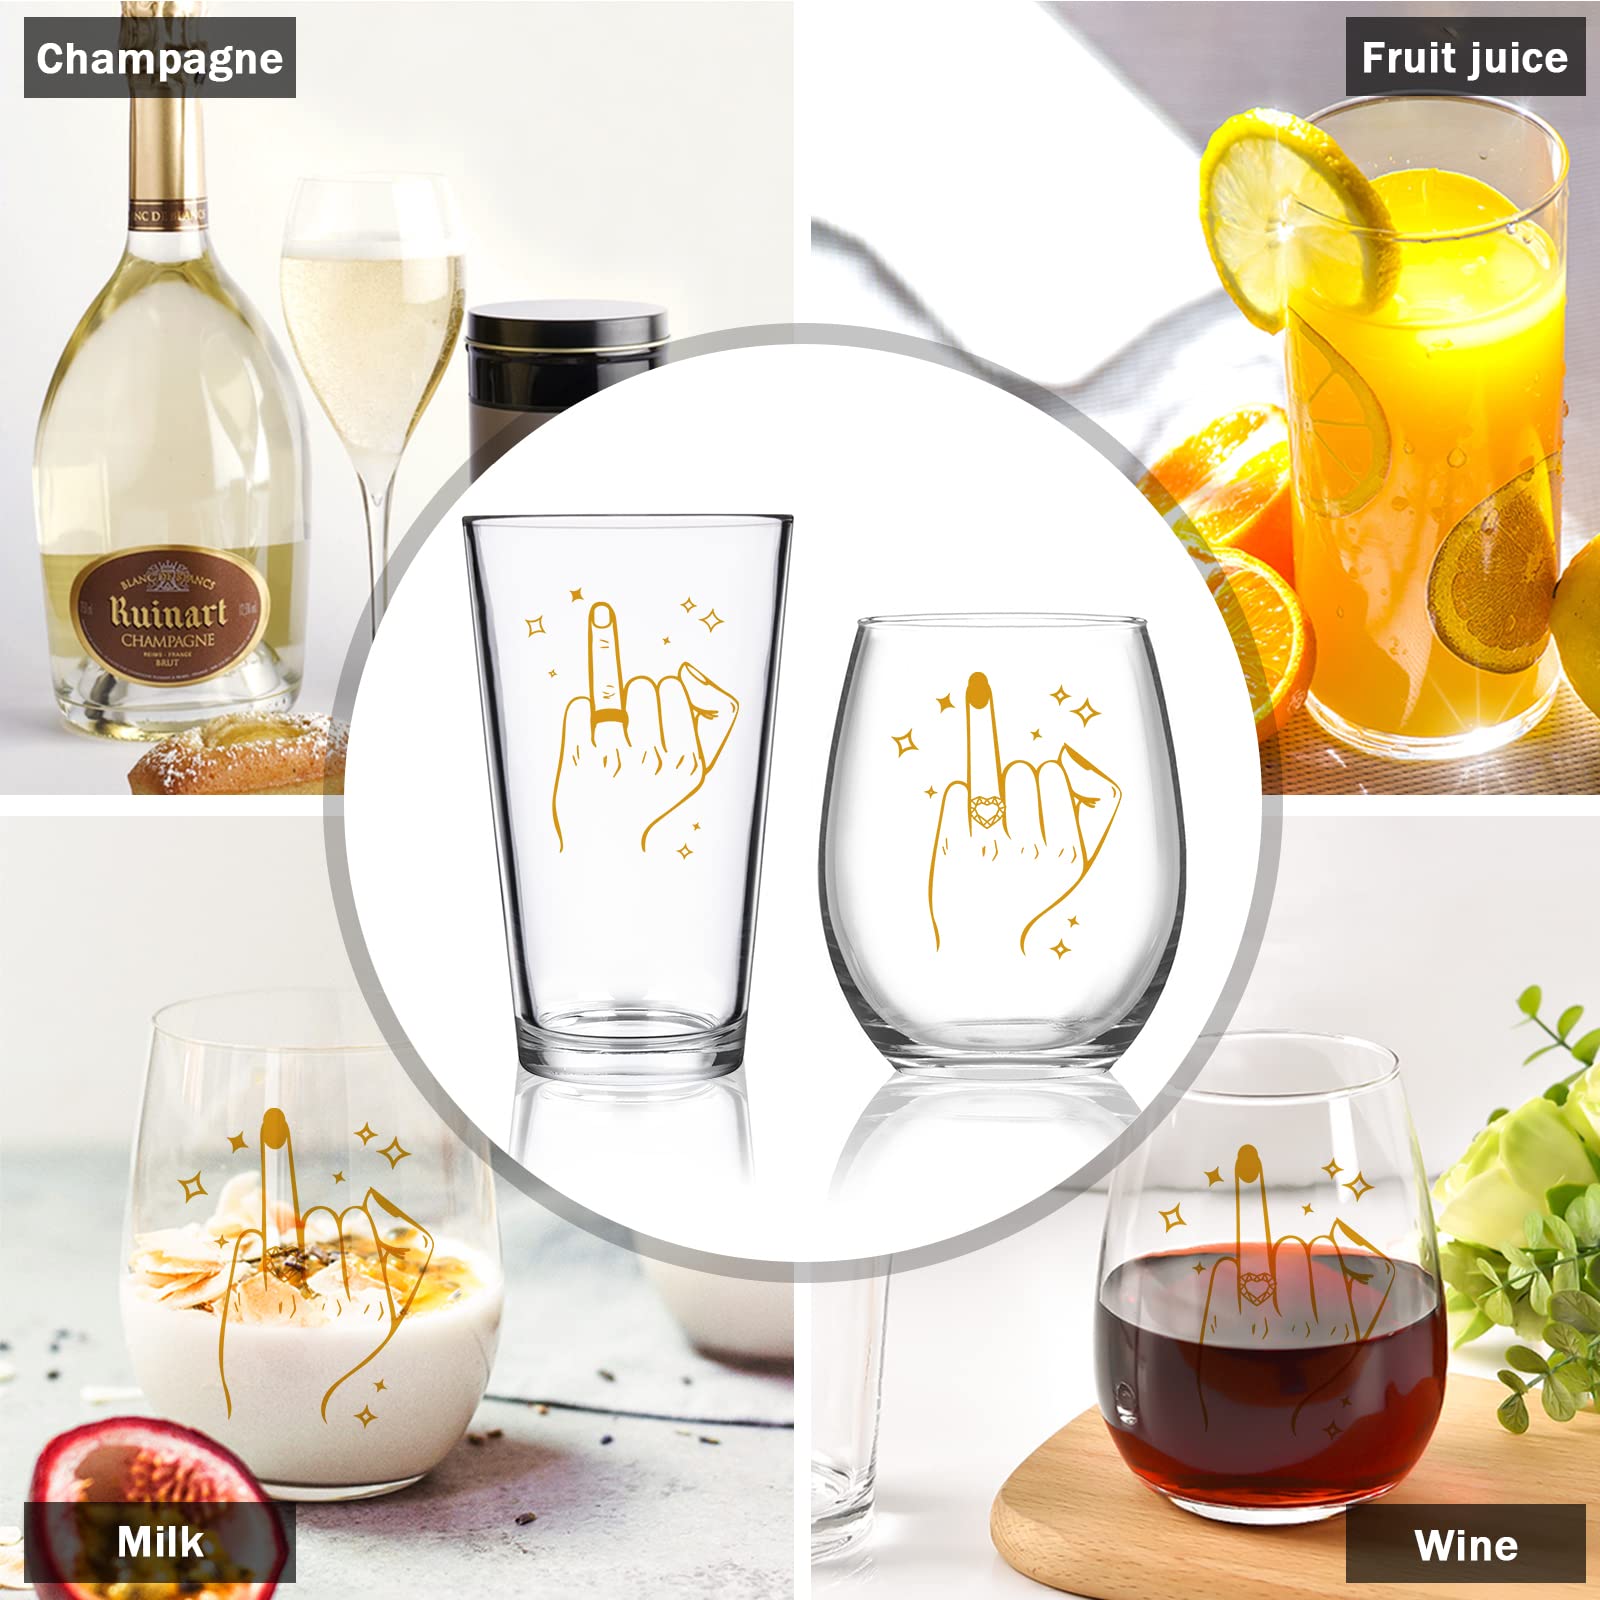 Futtumy Ring Finger Stemless Wine Glass & Beer Glass Set, Unique Engagement Gift Wedding Gift Bride and Groom Gift Mr and Mrs Gift Bridal Shower Gift for Couple Newlywed Mr & Mrs